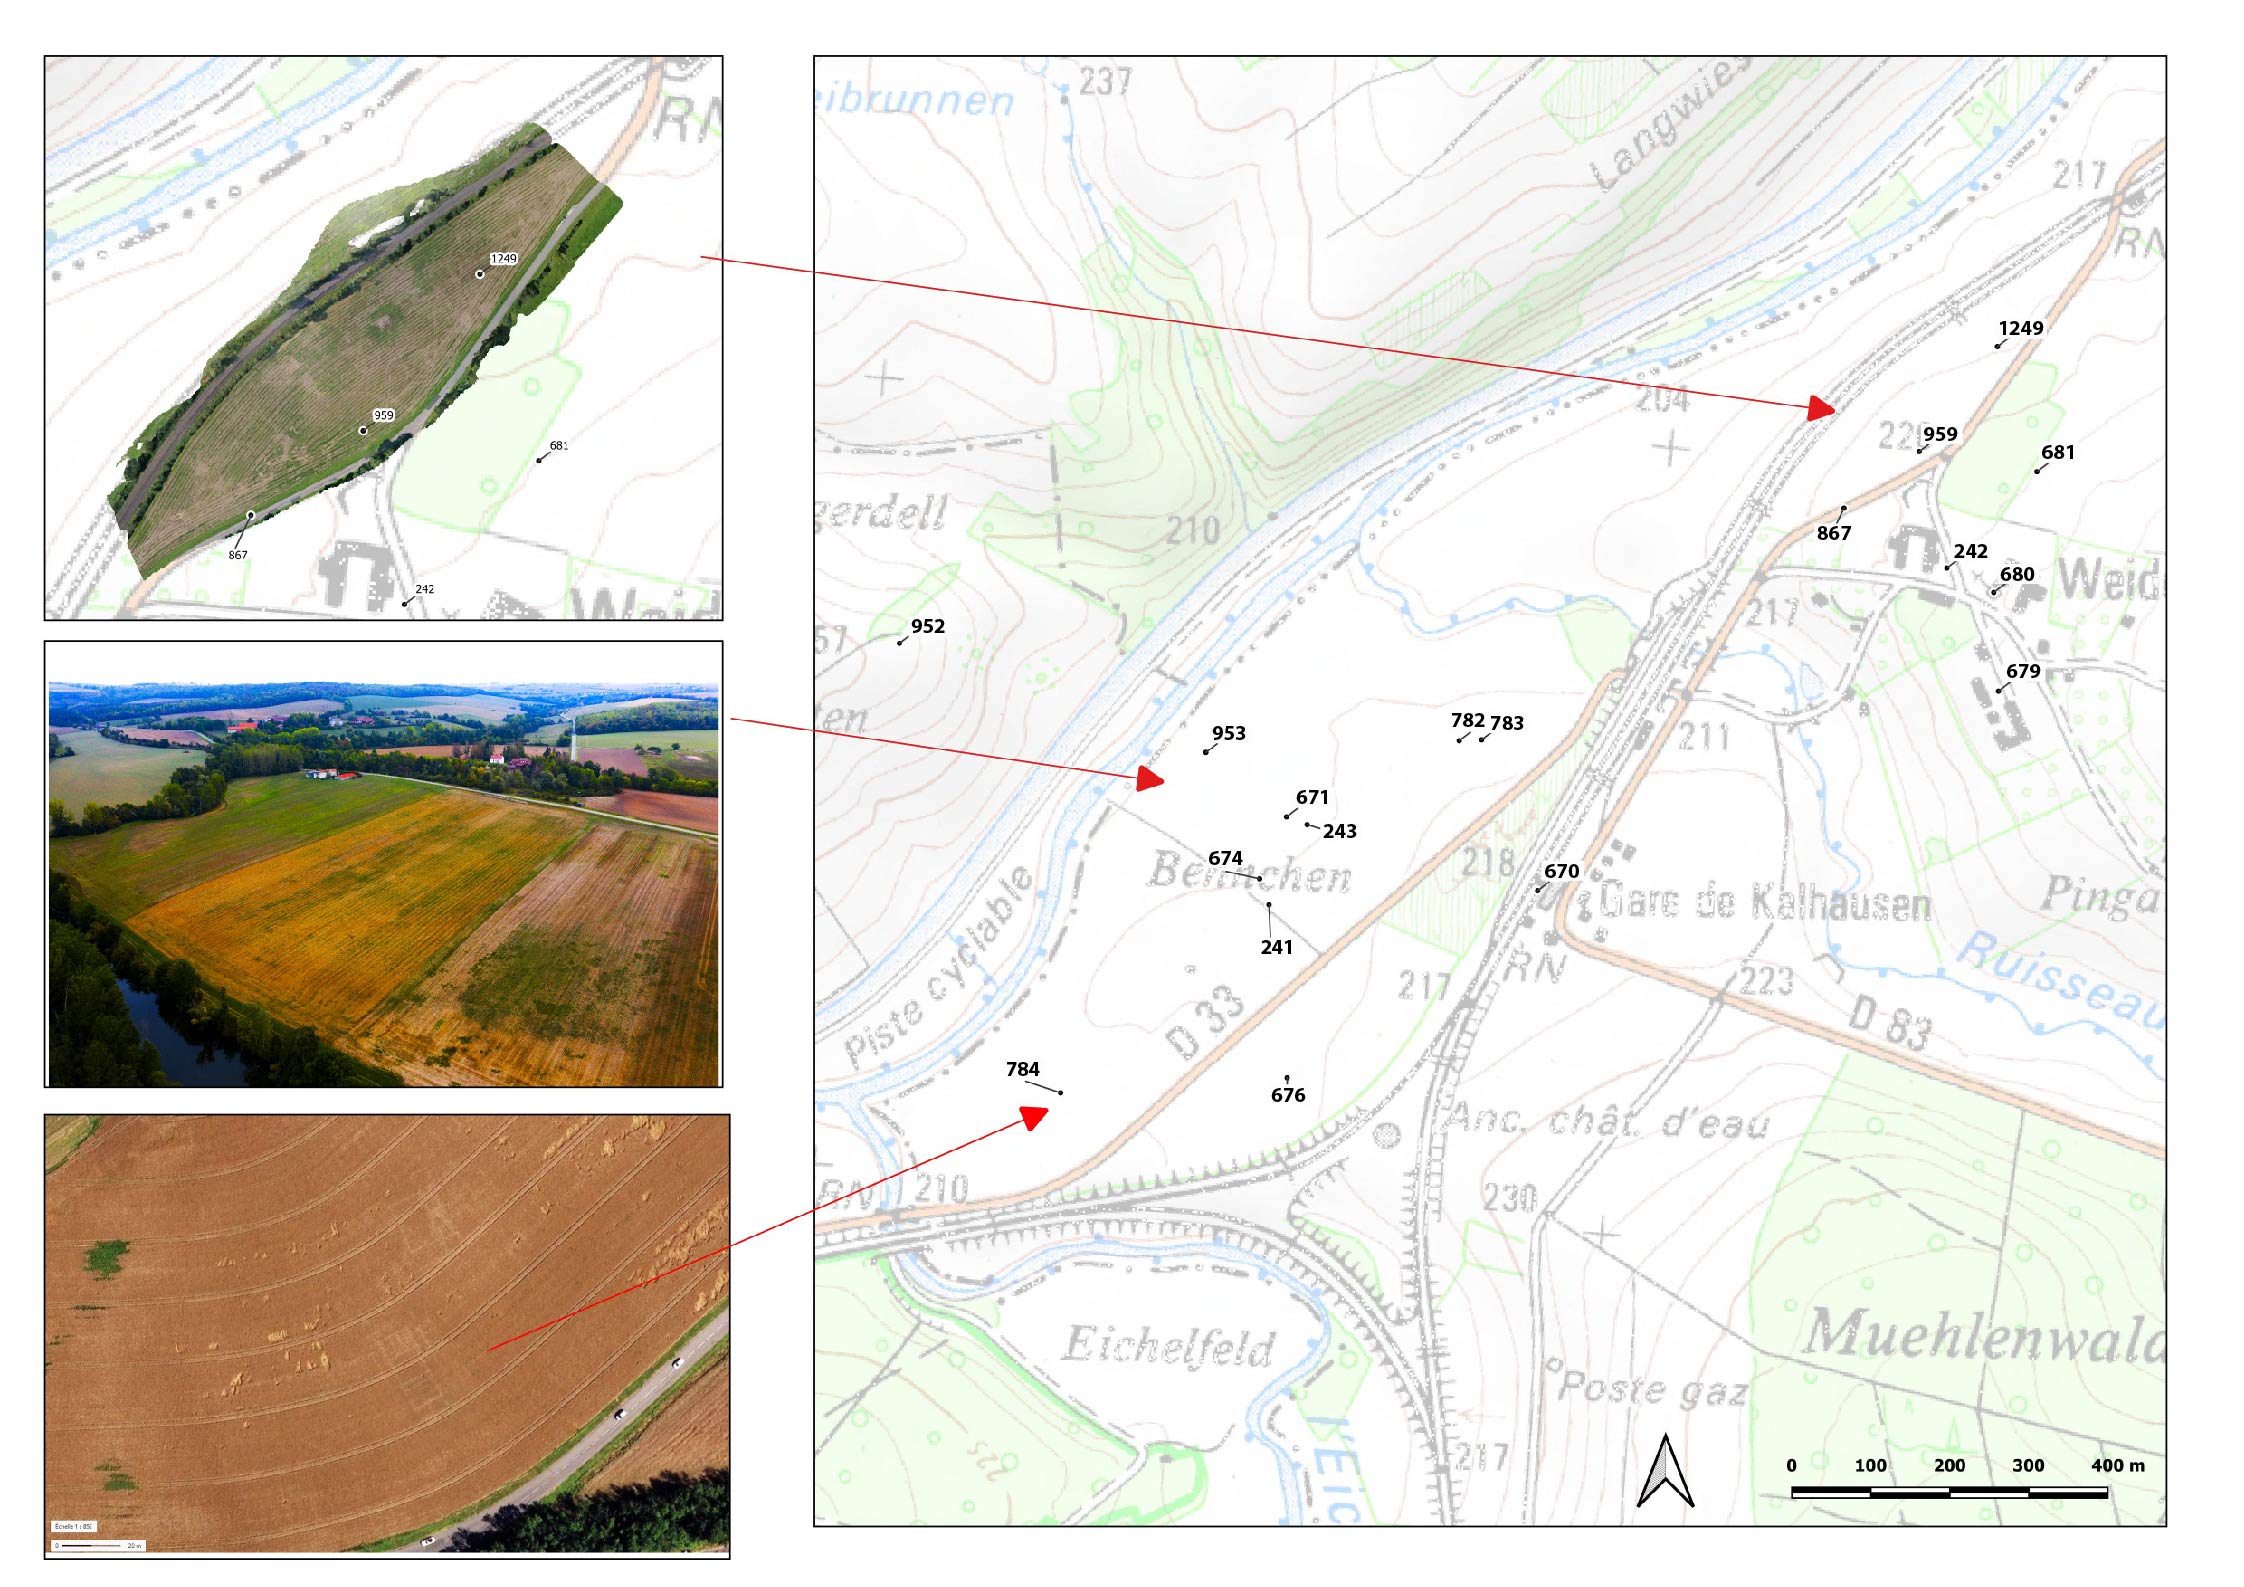  Figure 8. Kalhausen, Weidesheim. Site distribution and aerial (Géoportail, 2012) and drone photos. 